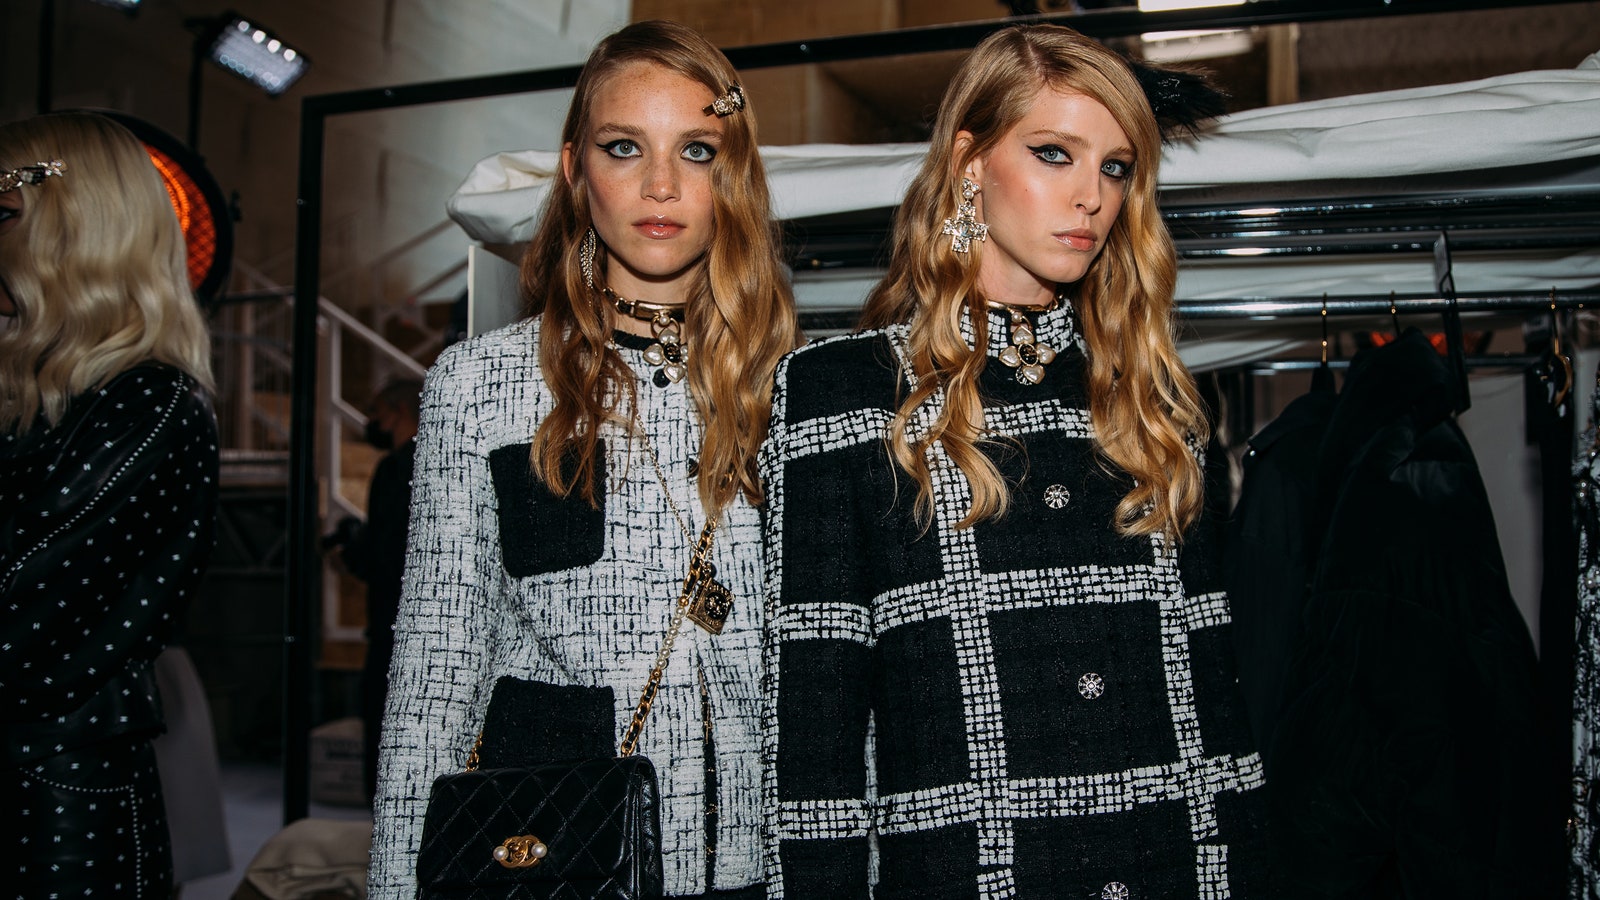 The Best Behind the Scenes Photos From Chanel’s Cruise 2022 Show in the South of France